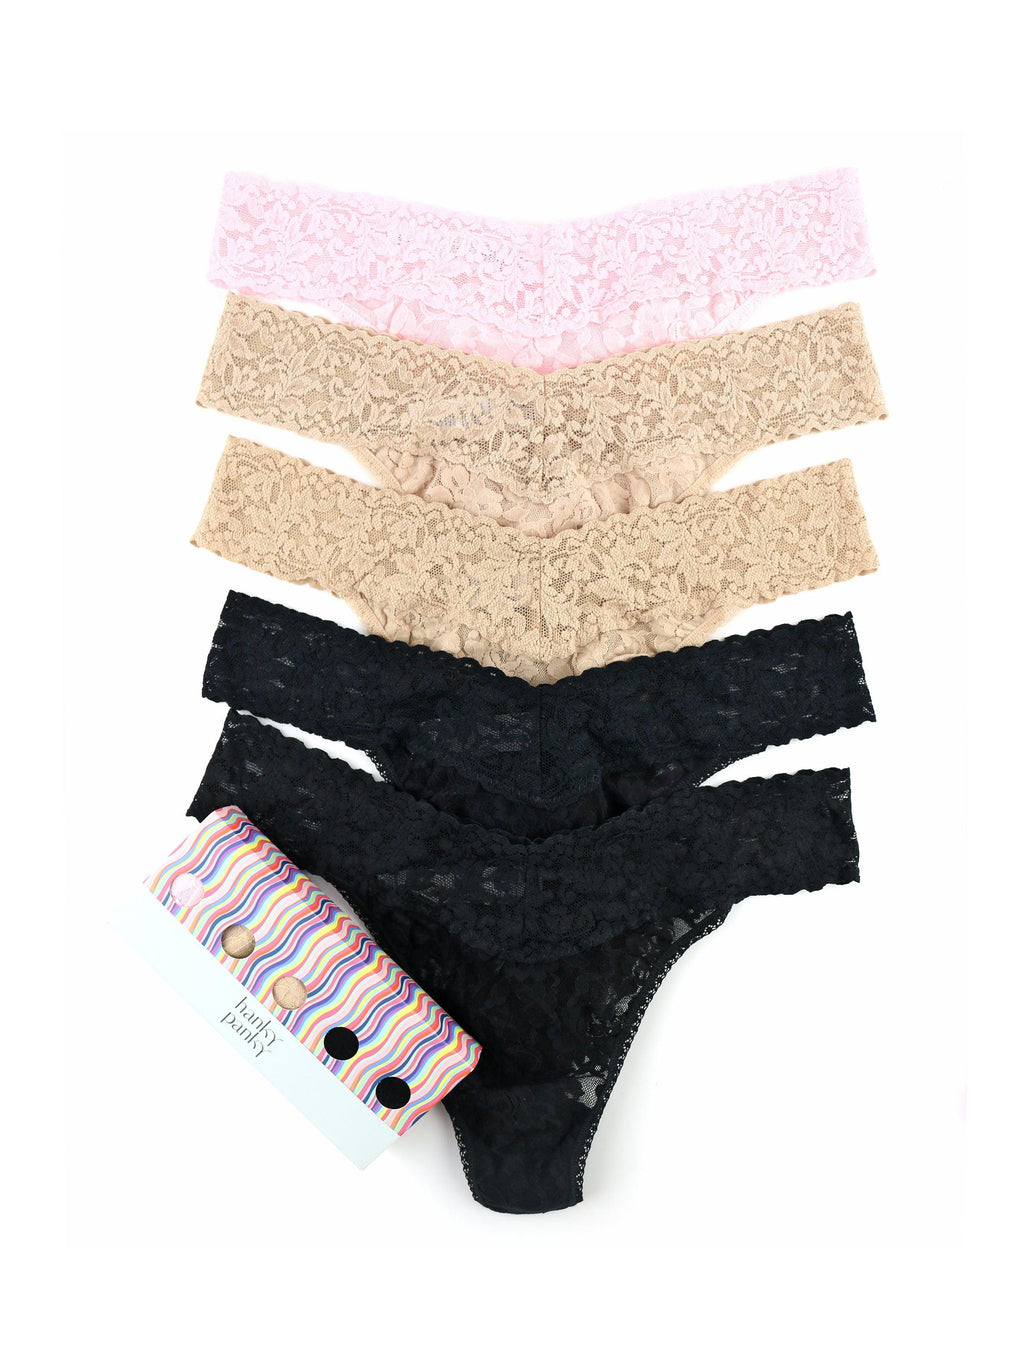 Popvcly 3 Pack Panties for Women Lace Trim Low Rise Panty Ladies